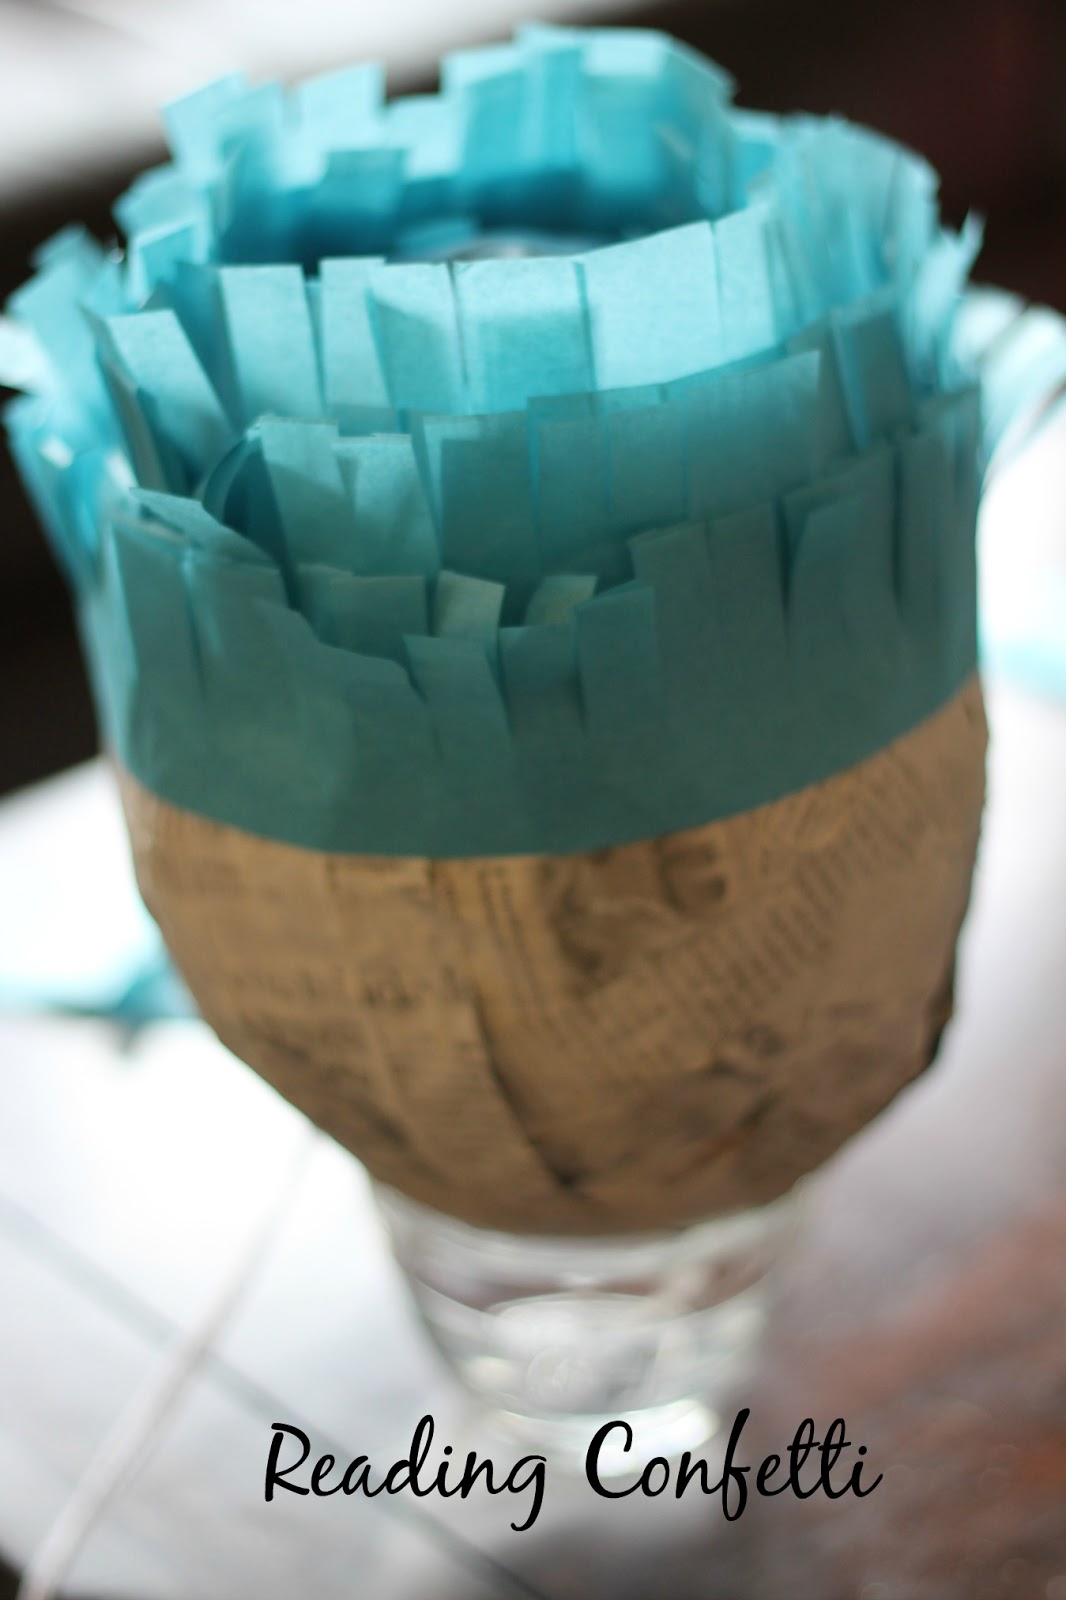 Make your own pinatas for a Frozen or princess themed birthday party